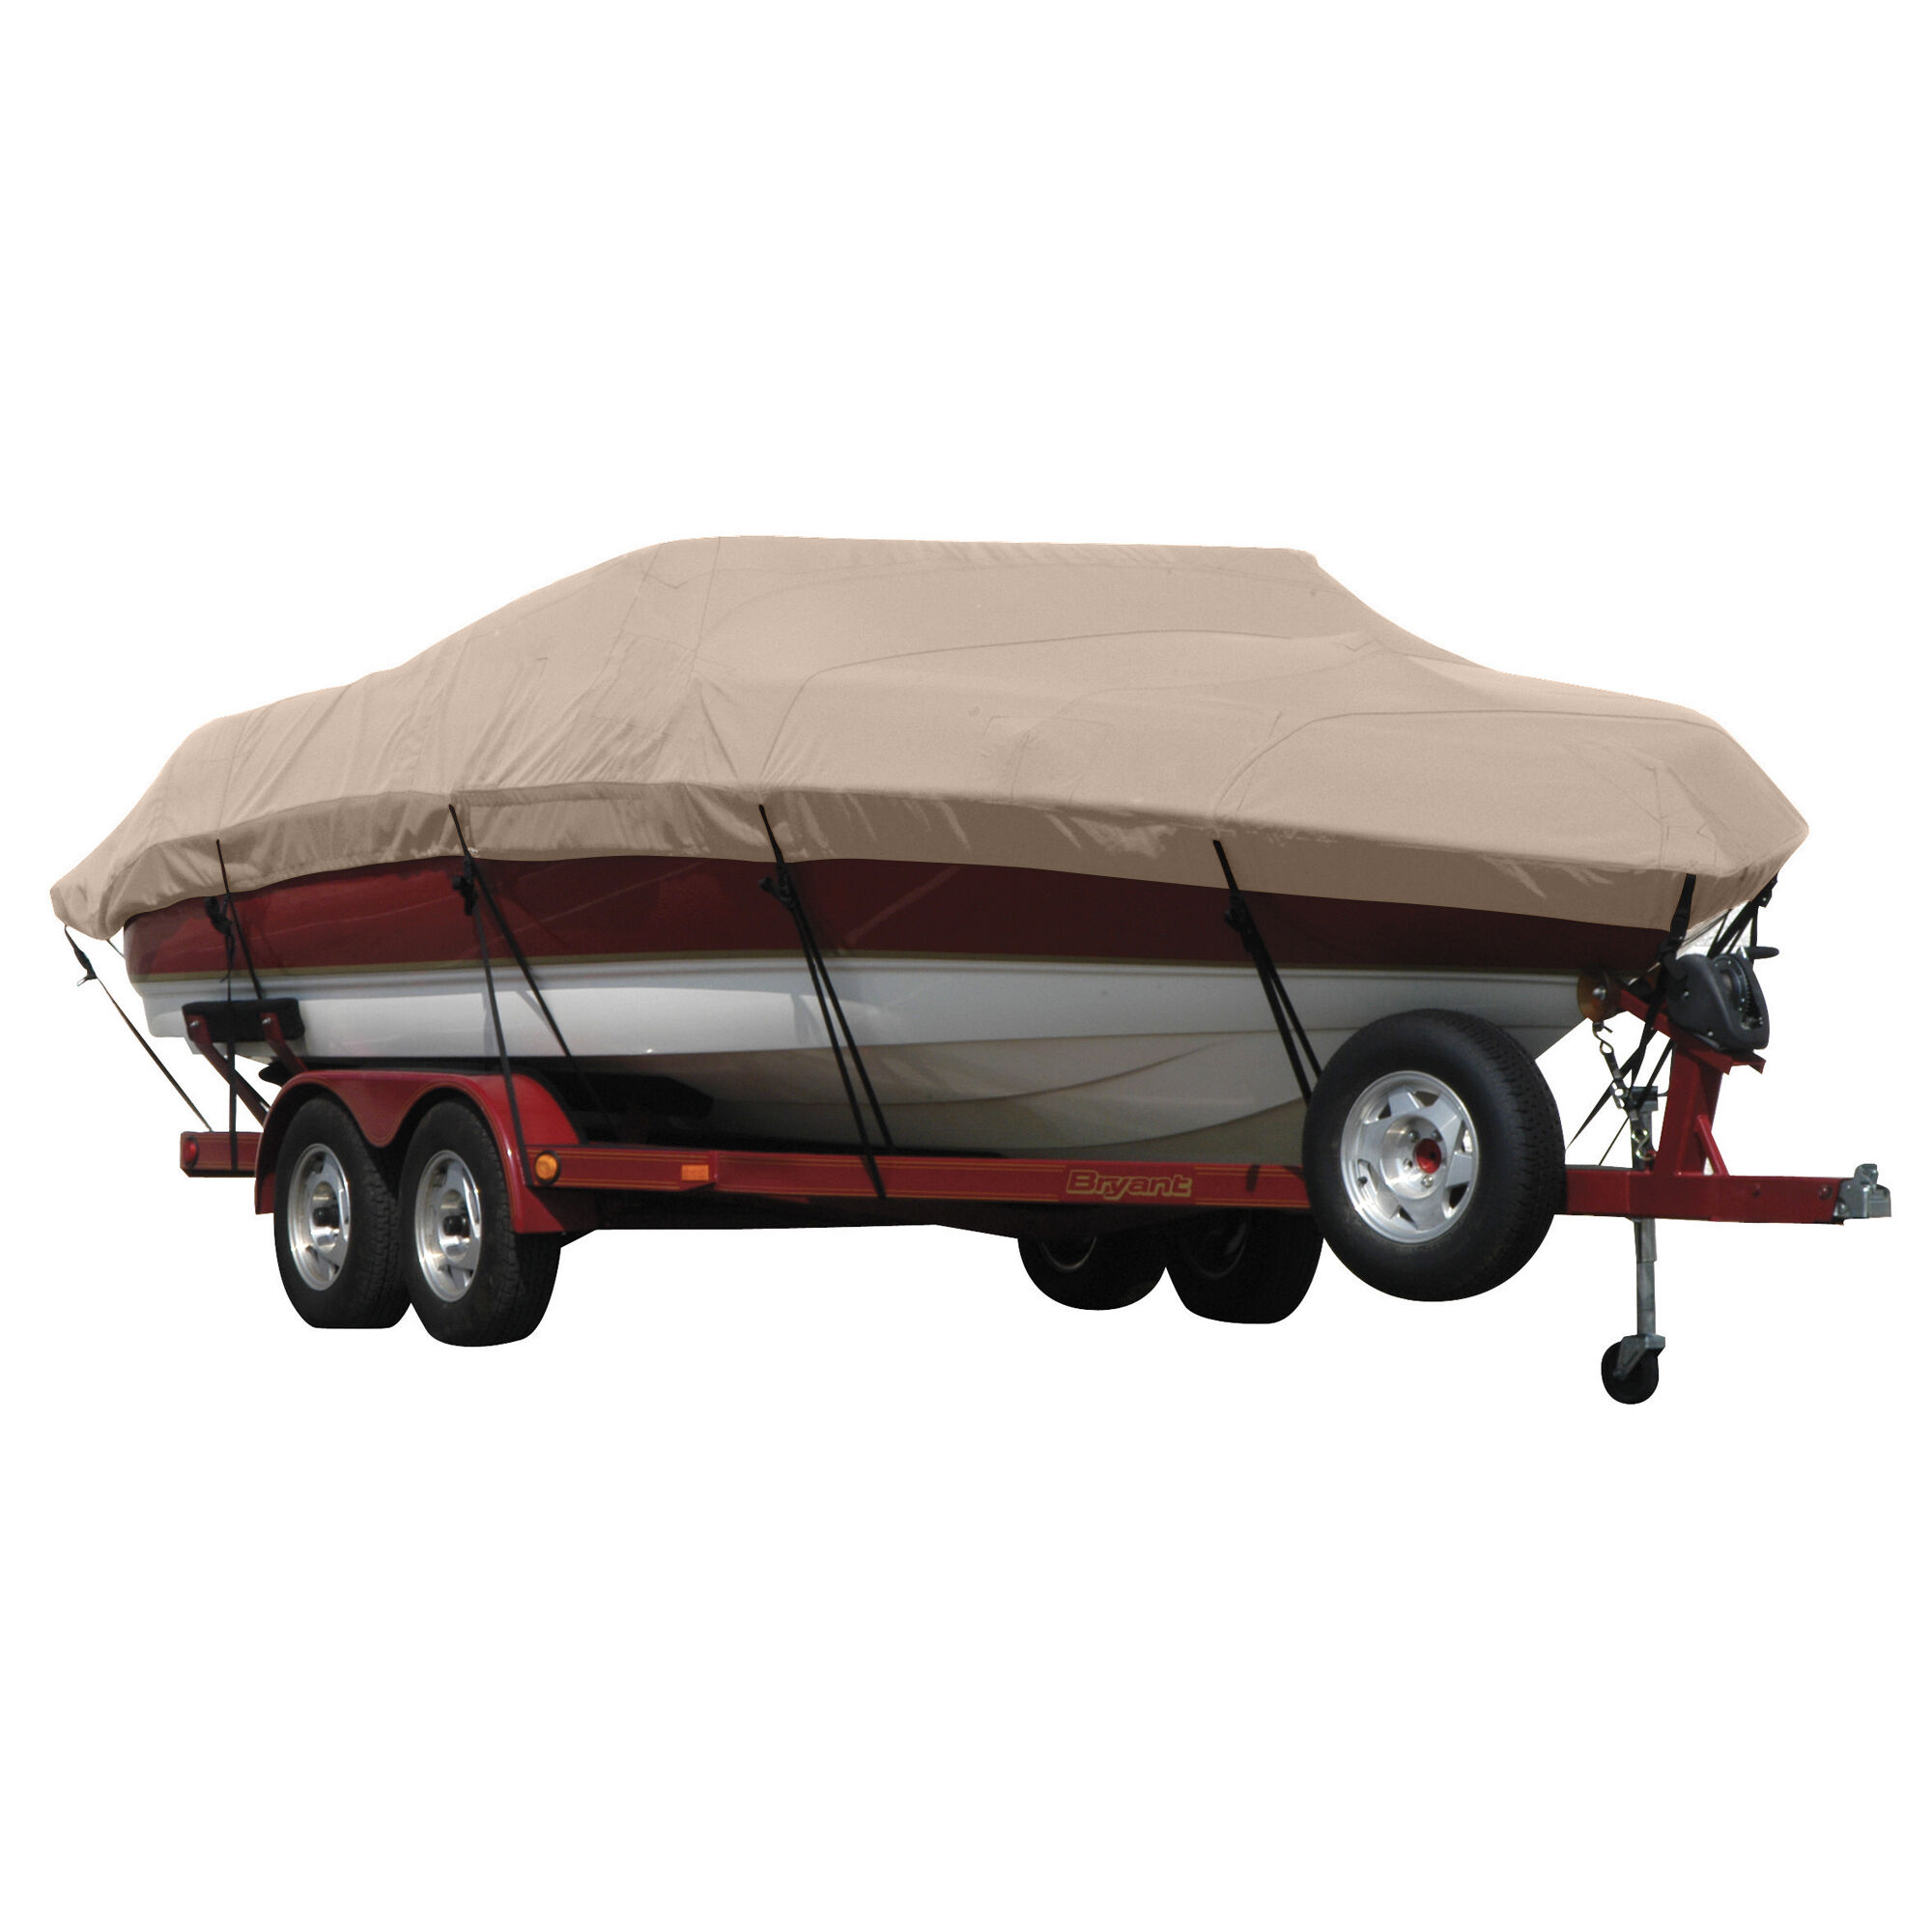 Covermate Exact Fit Sunbrella Boat Cover for Bayliner Classic 192 Ey Classic 192 Ey Does Not Accommodate Strb Ladderi/O. Linnen in Linen